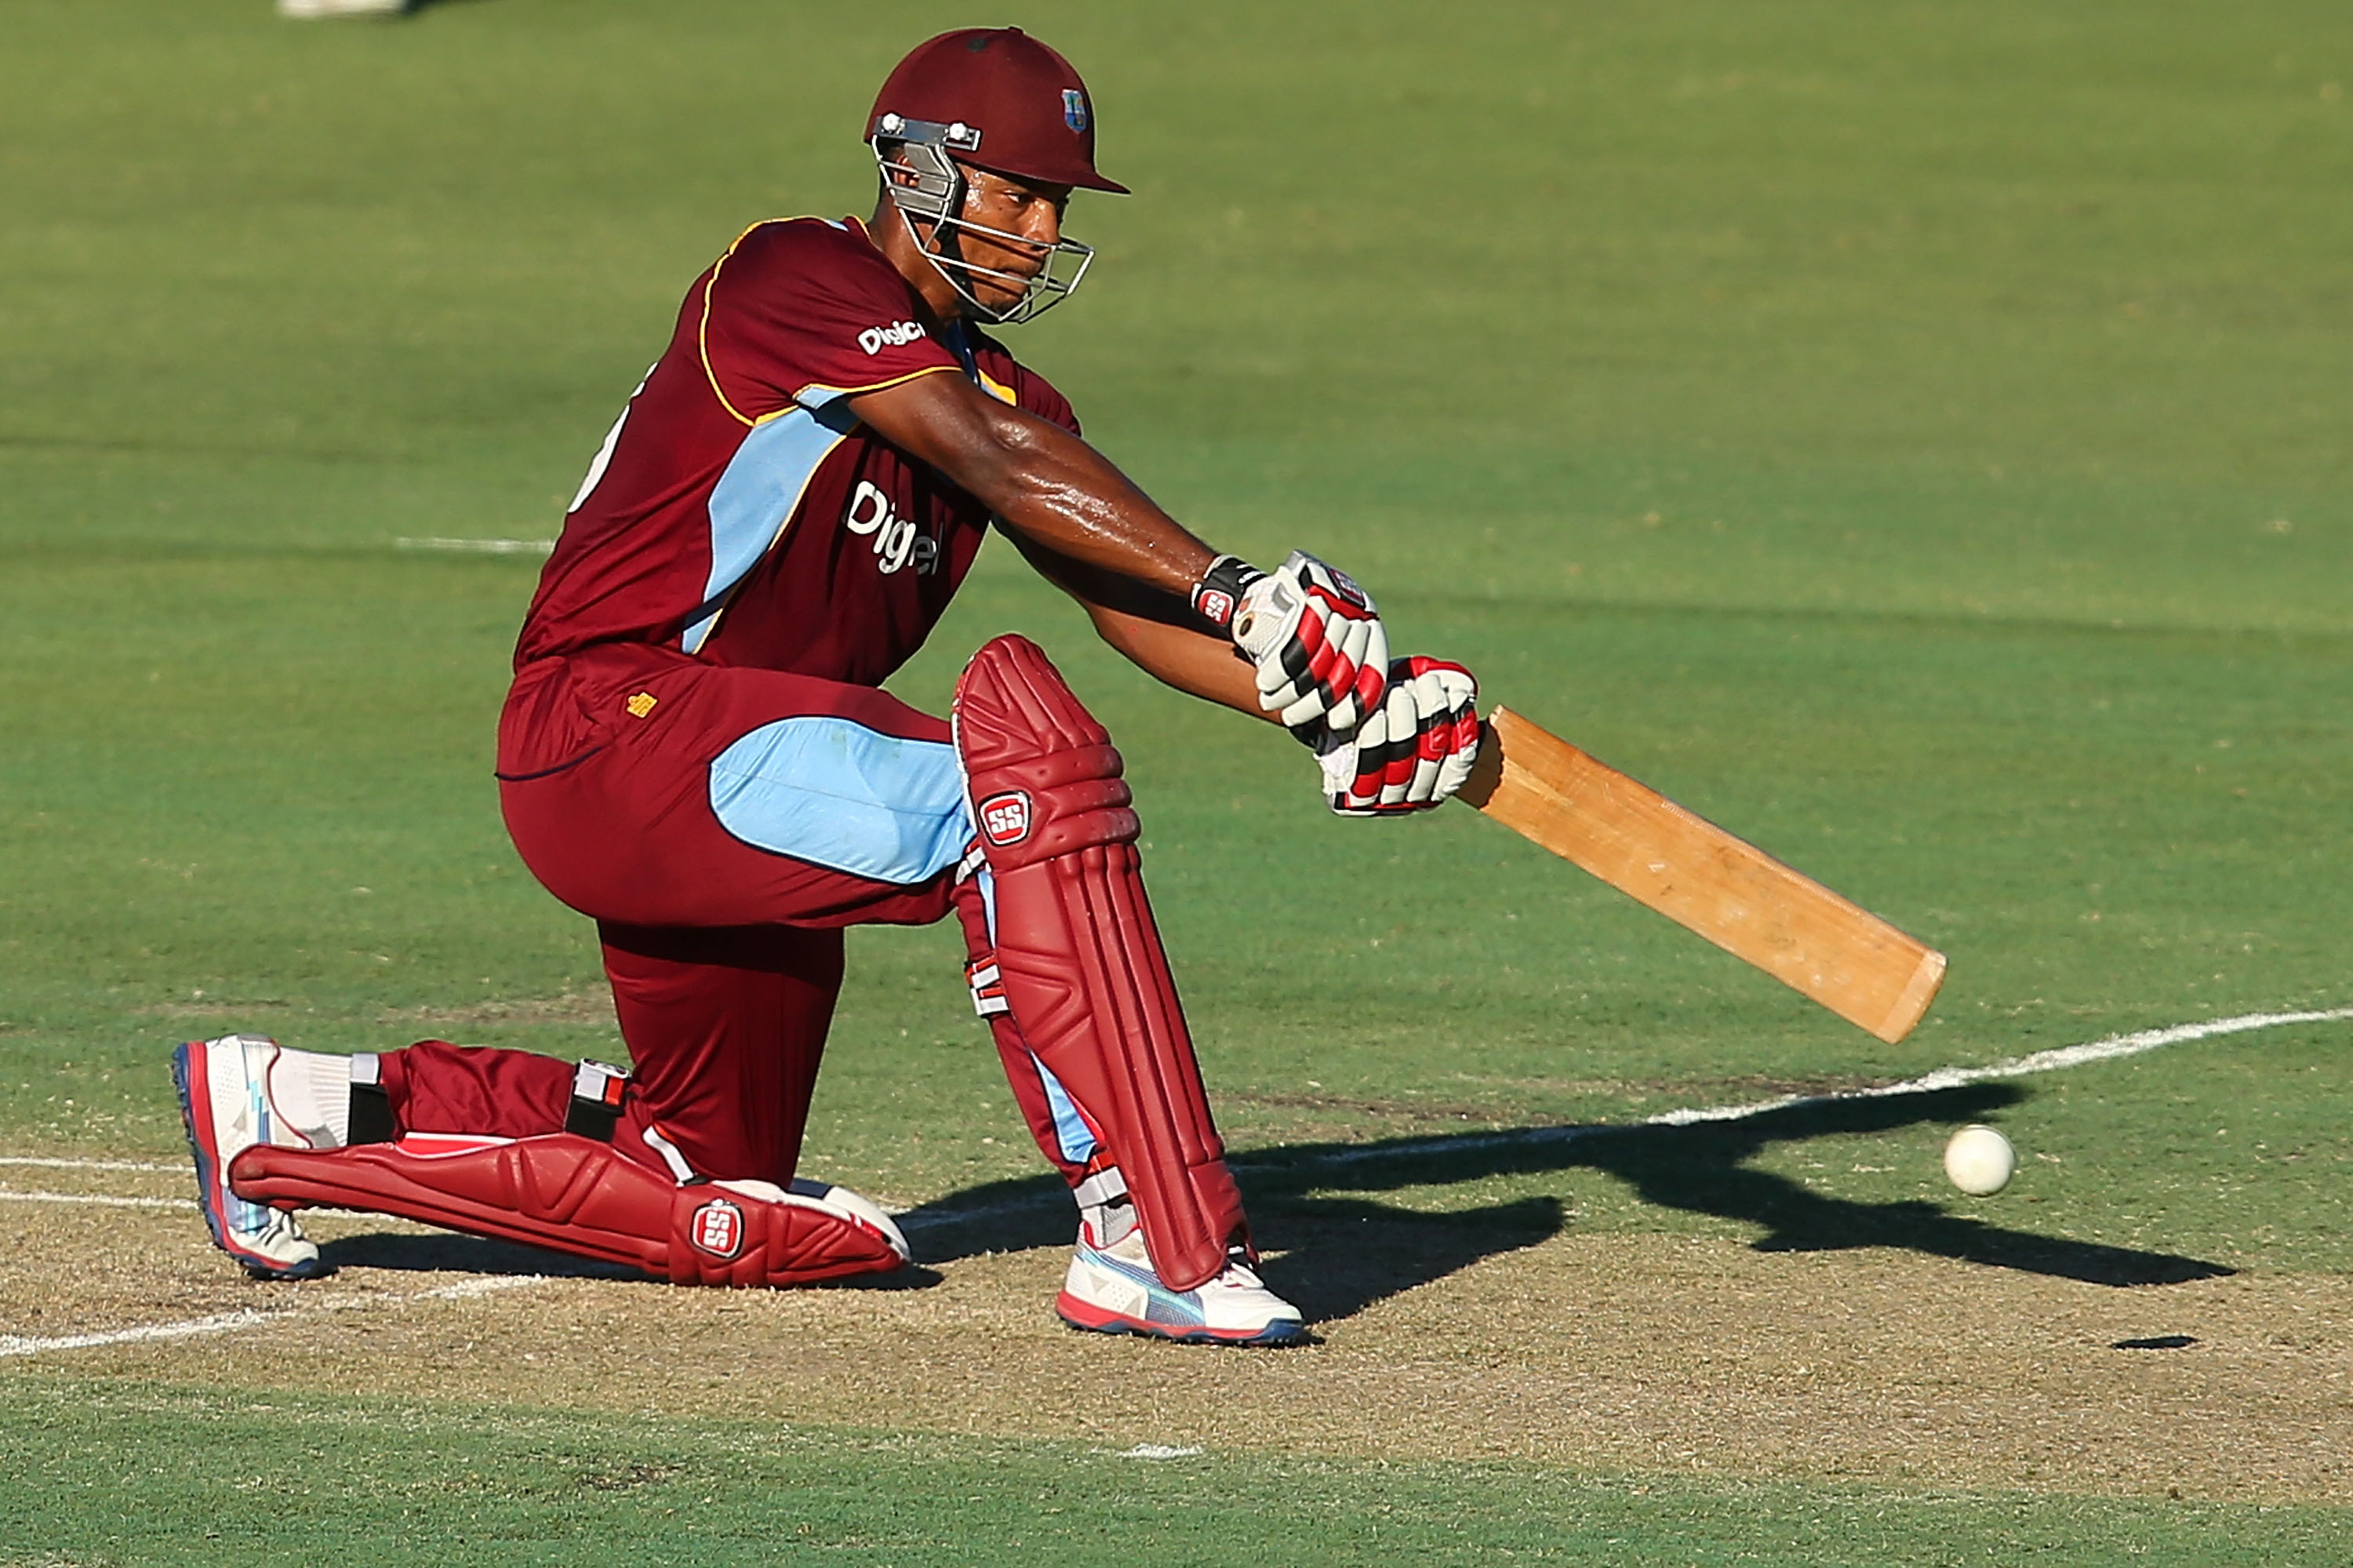 Back to cricket after a baseball stint, Kieran Powell hoping to make the most of his return